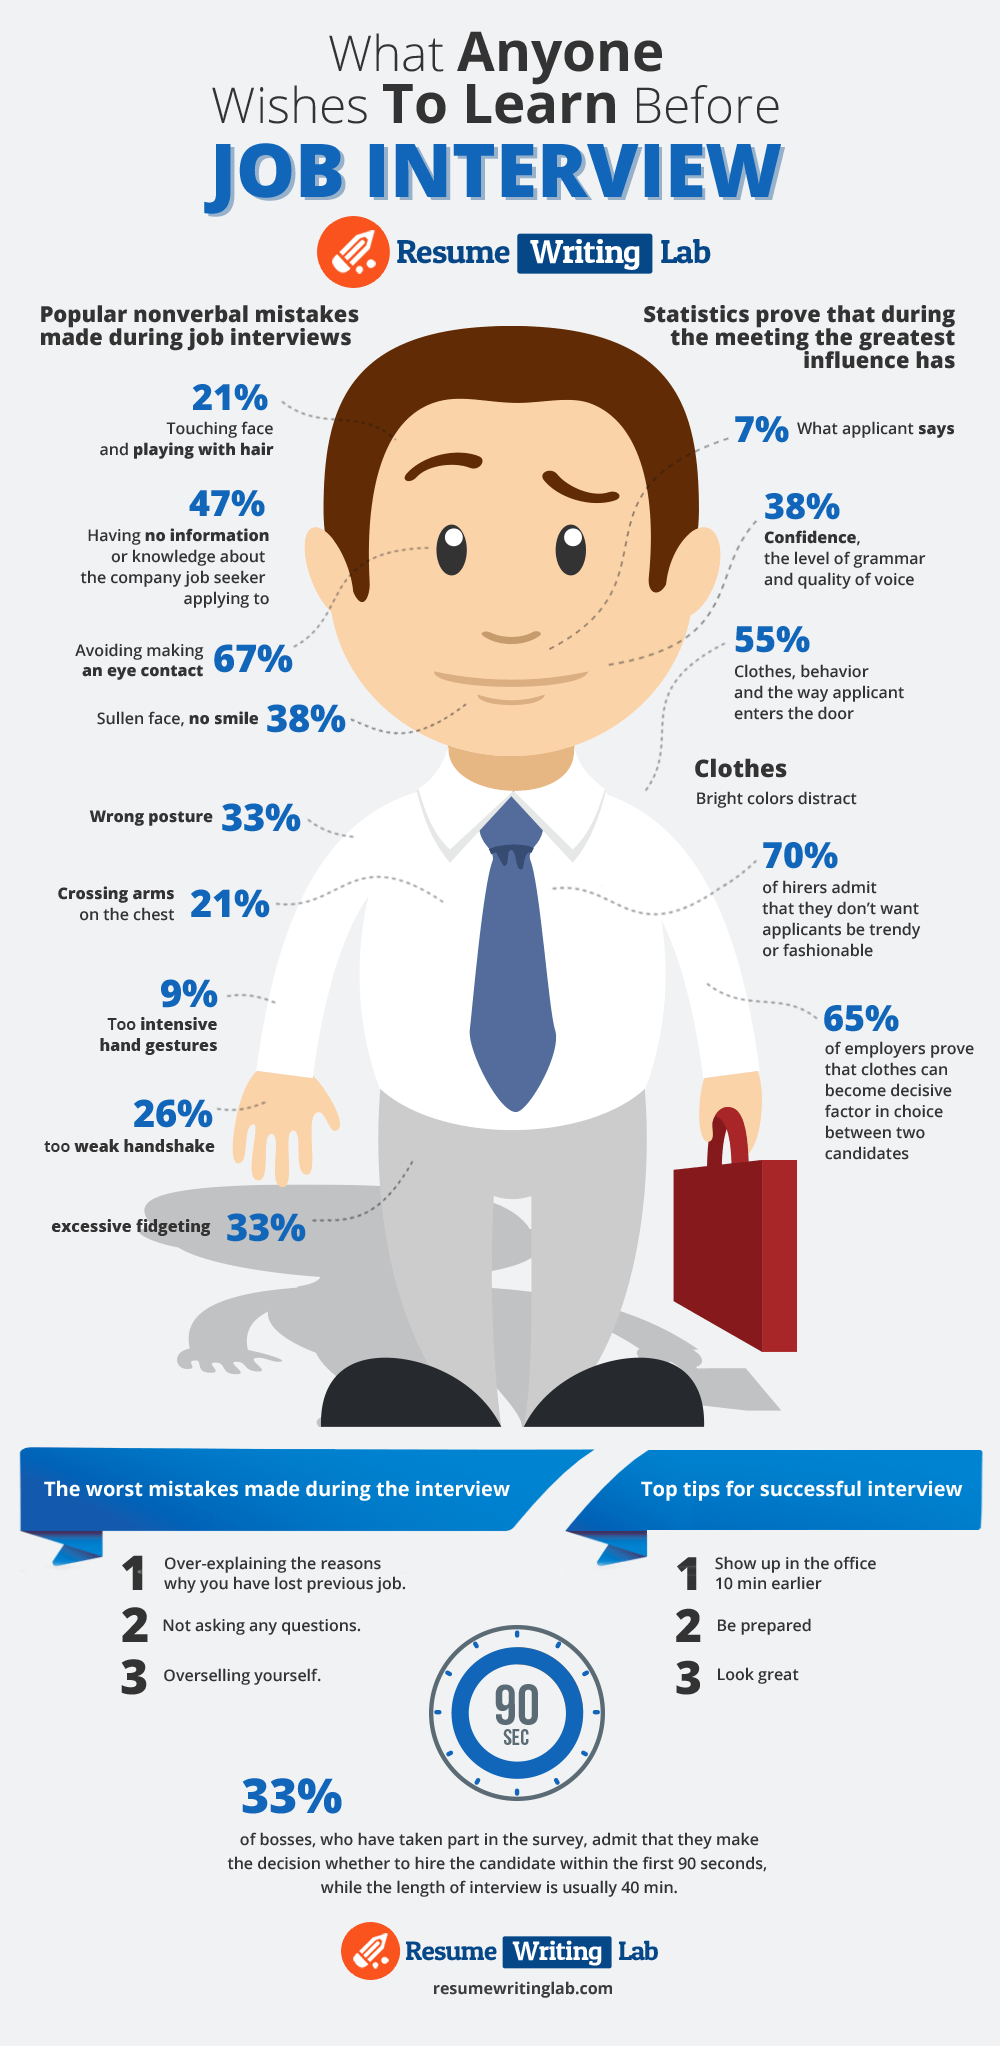 Best ways to prepare for a job interview